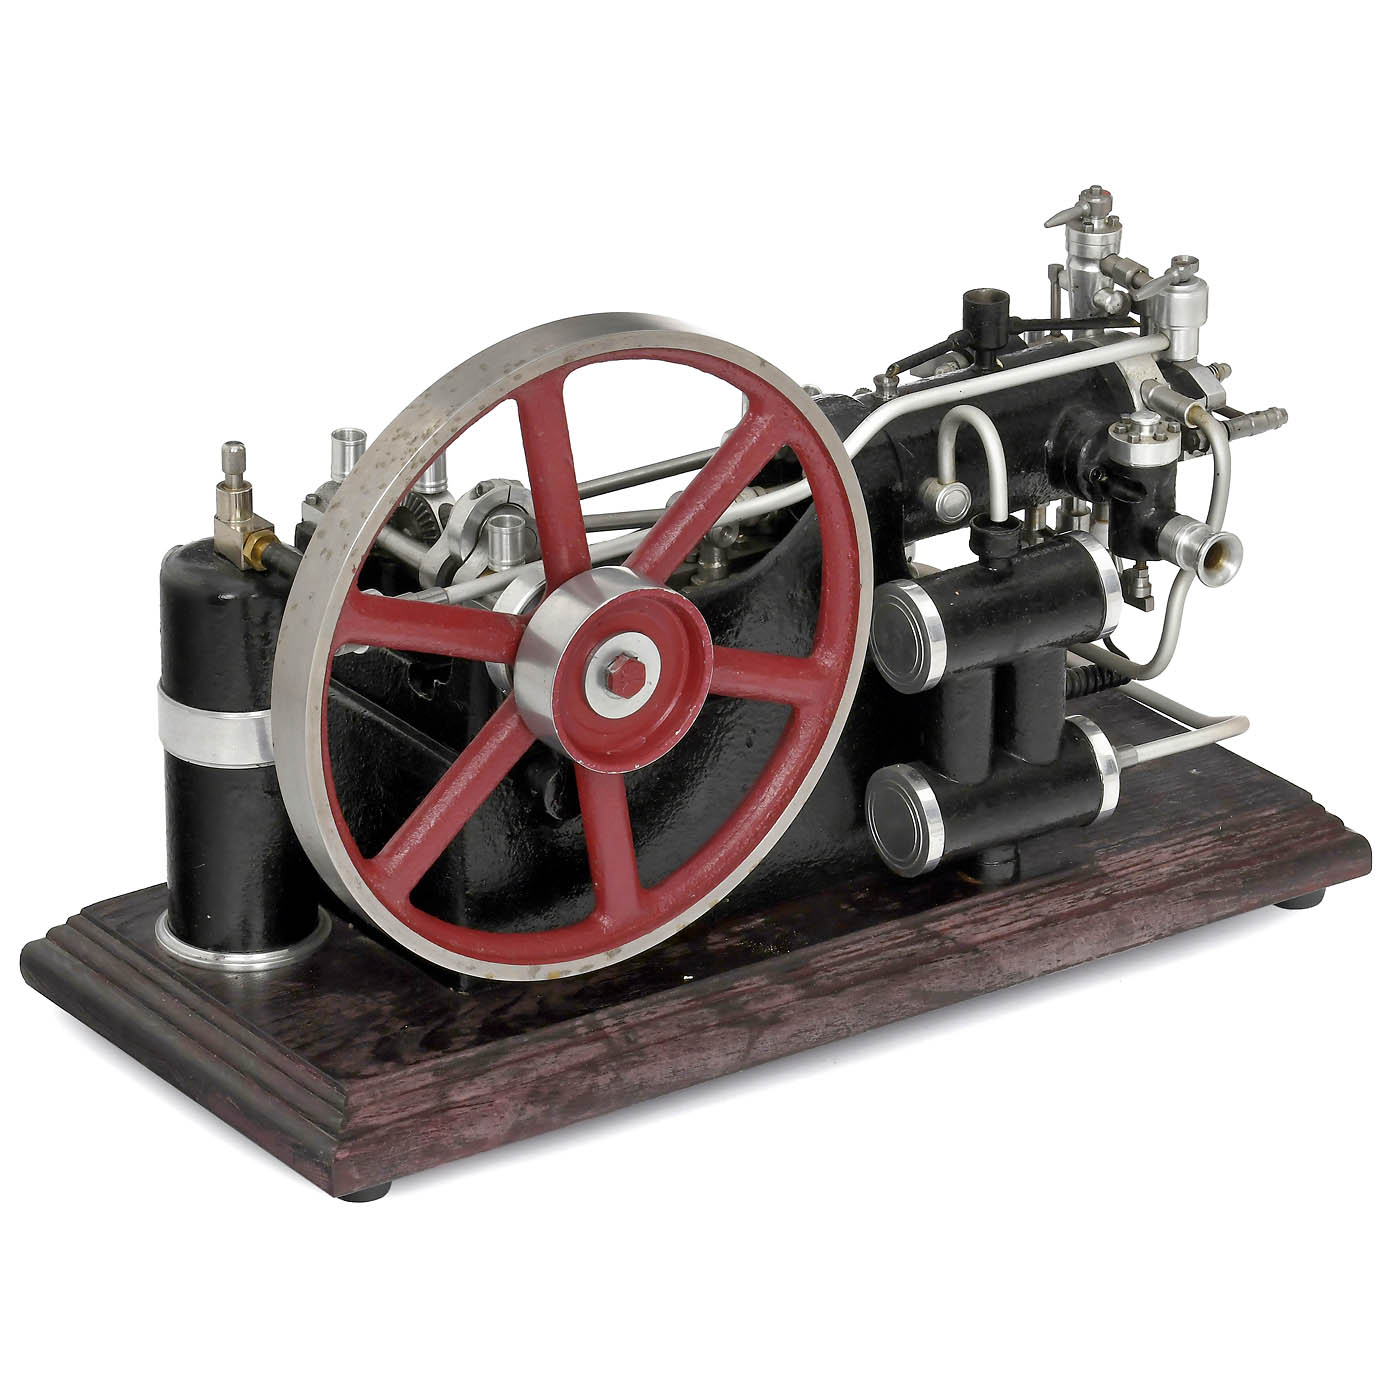 Working Model of a Horizontal Four-Stroke Otto Gas Engine - Image 2 of 3